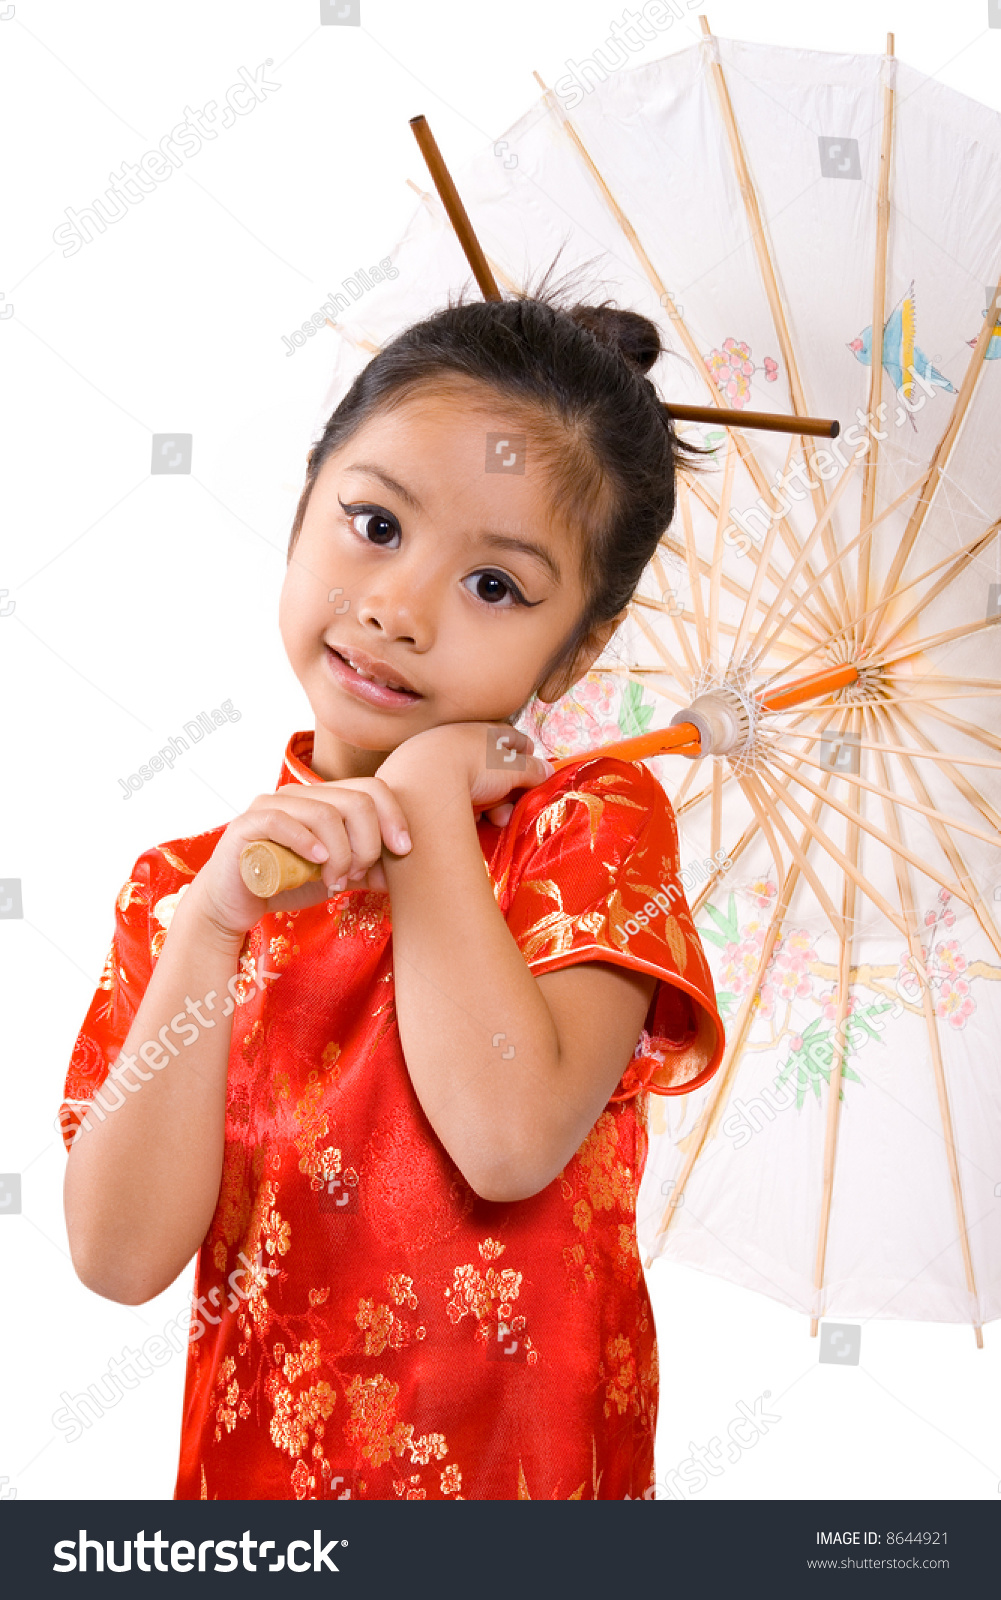 Cute Smile From An Asian Child Stock Photo 8644921 : Shutterstock